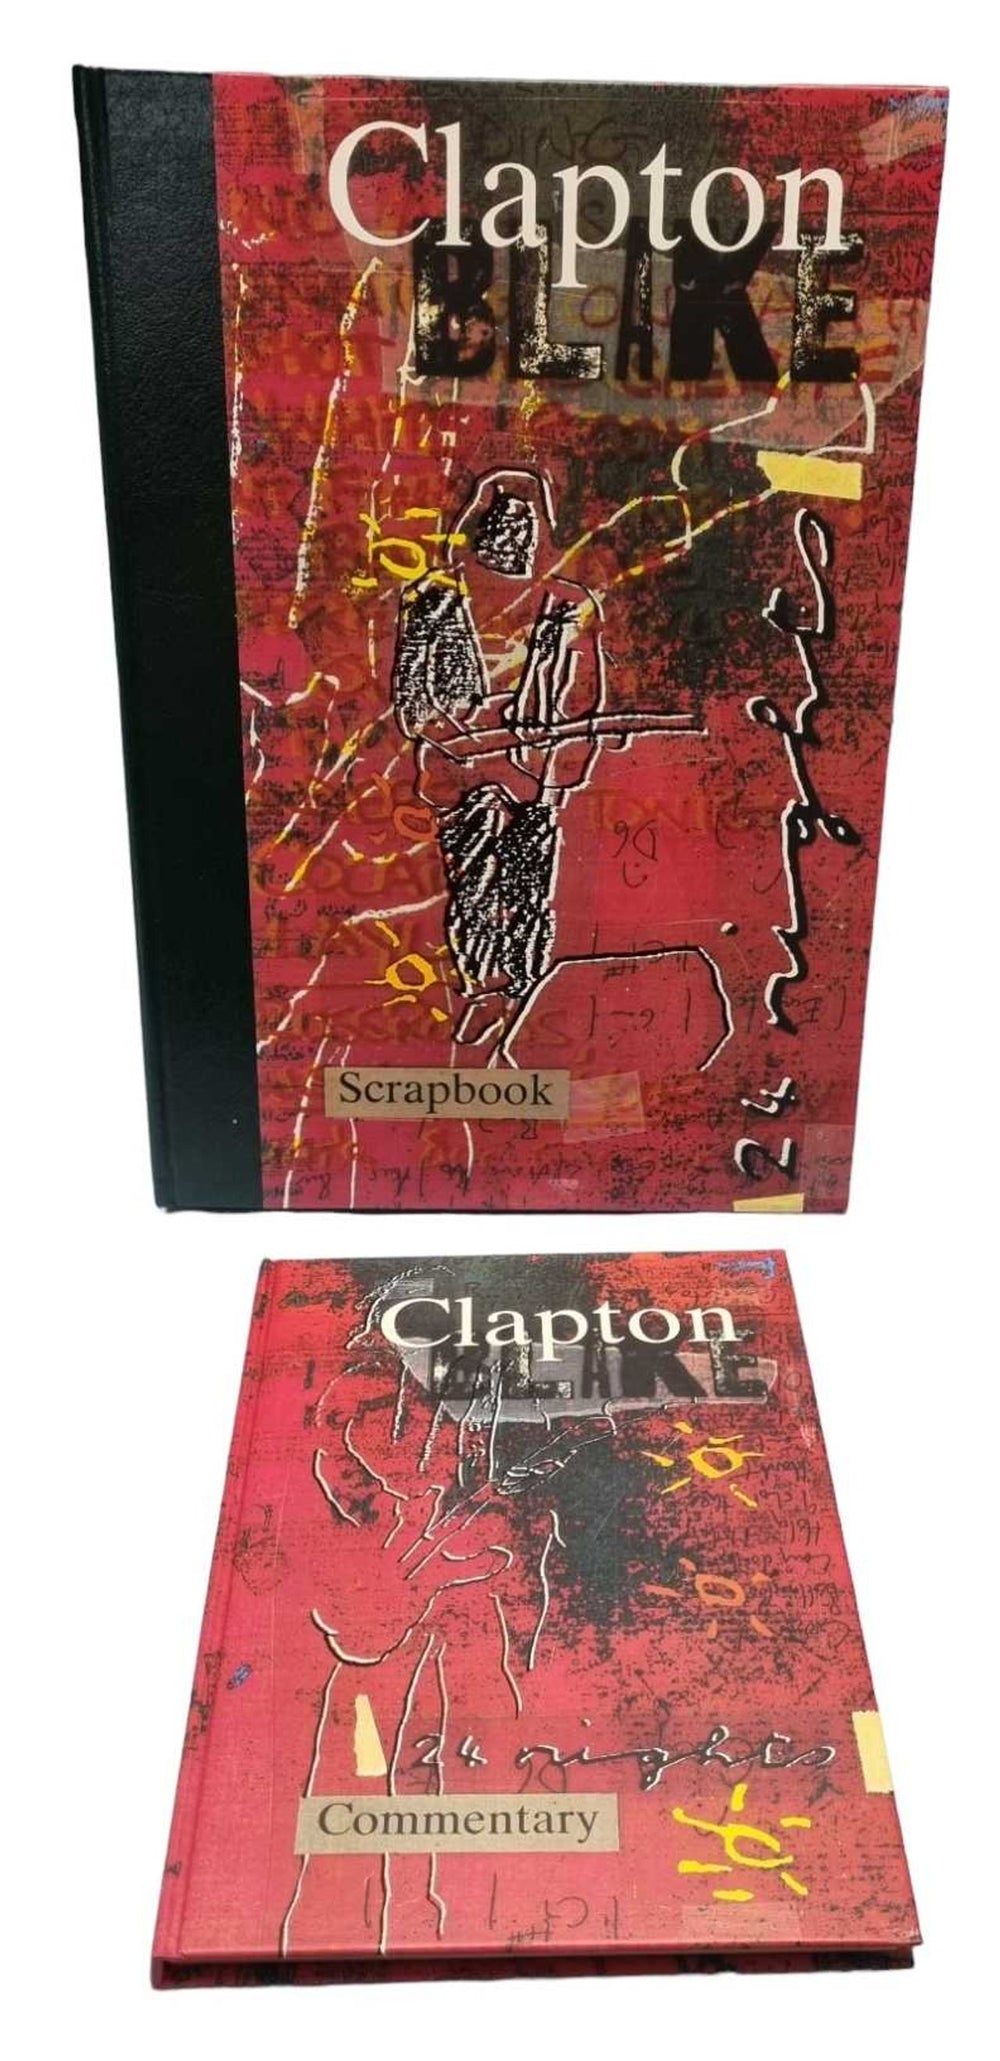 Eric Clapton 24 Nights The Limited Edition - Numbered UK book 1991